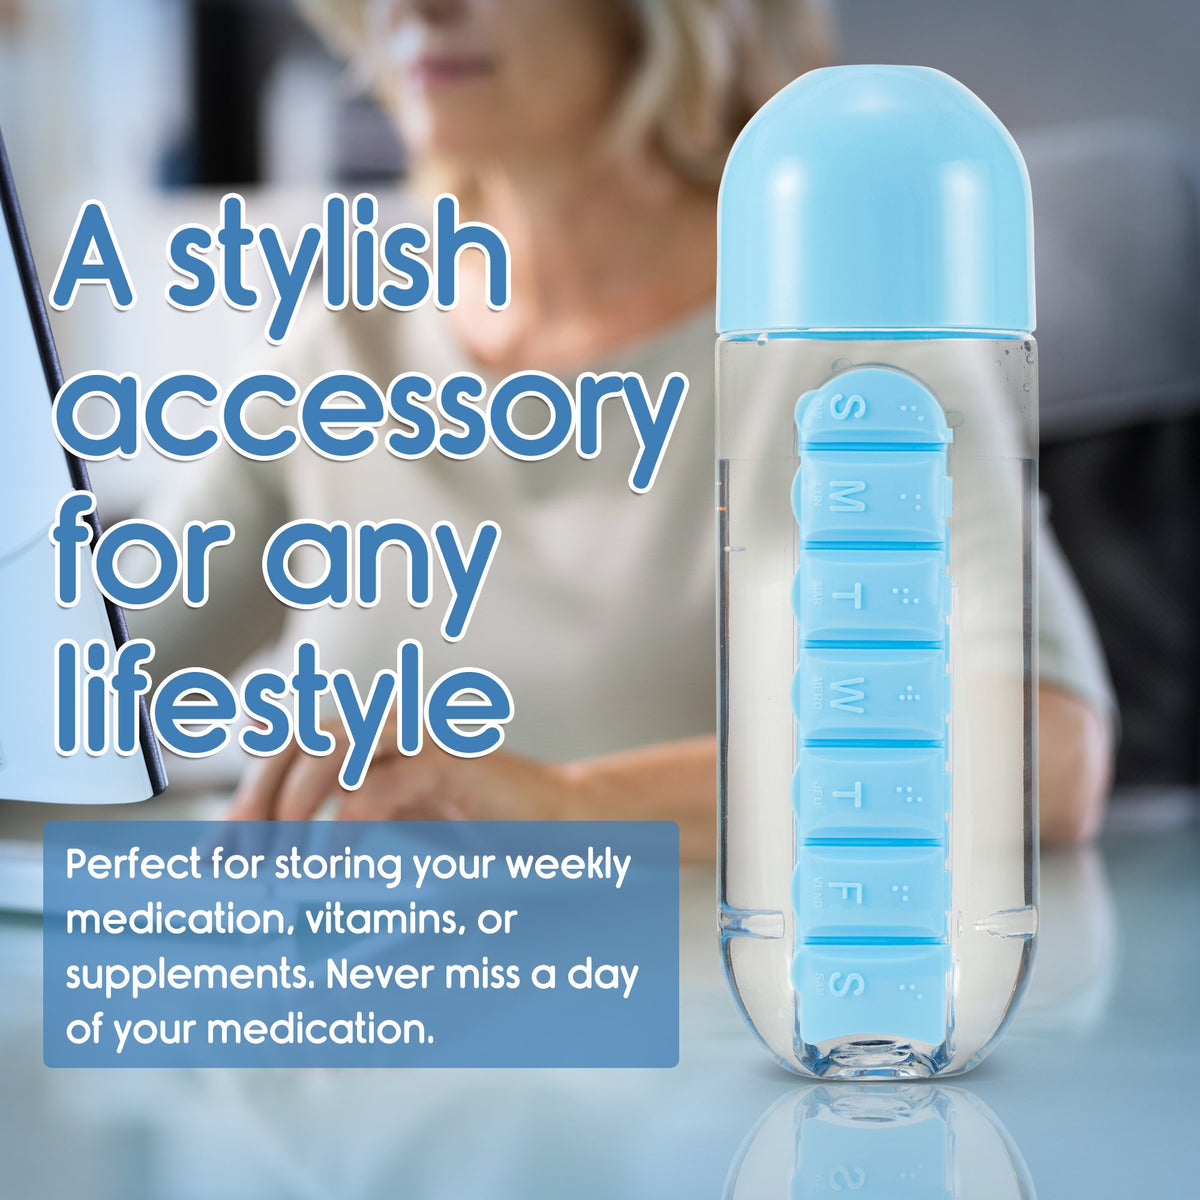 20 oz Water Bottle with Built-In Pill Box, Daily Pill Organizer - 7 Day Pill Holder, Easy-to-Clean Travel Pill Container, Slide-Out Design, Efficient Pill Organizer for Everyday Use